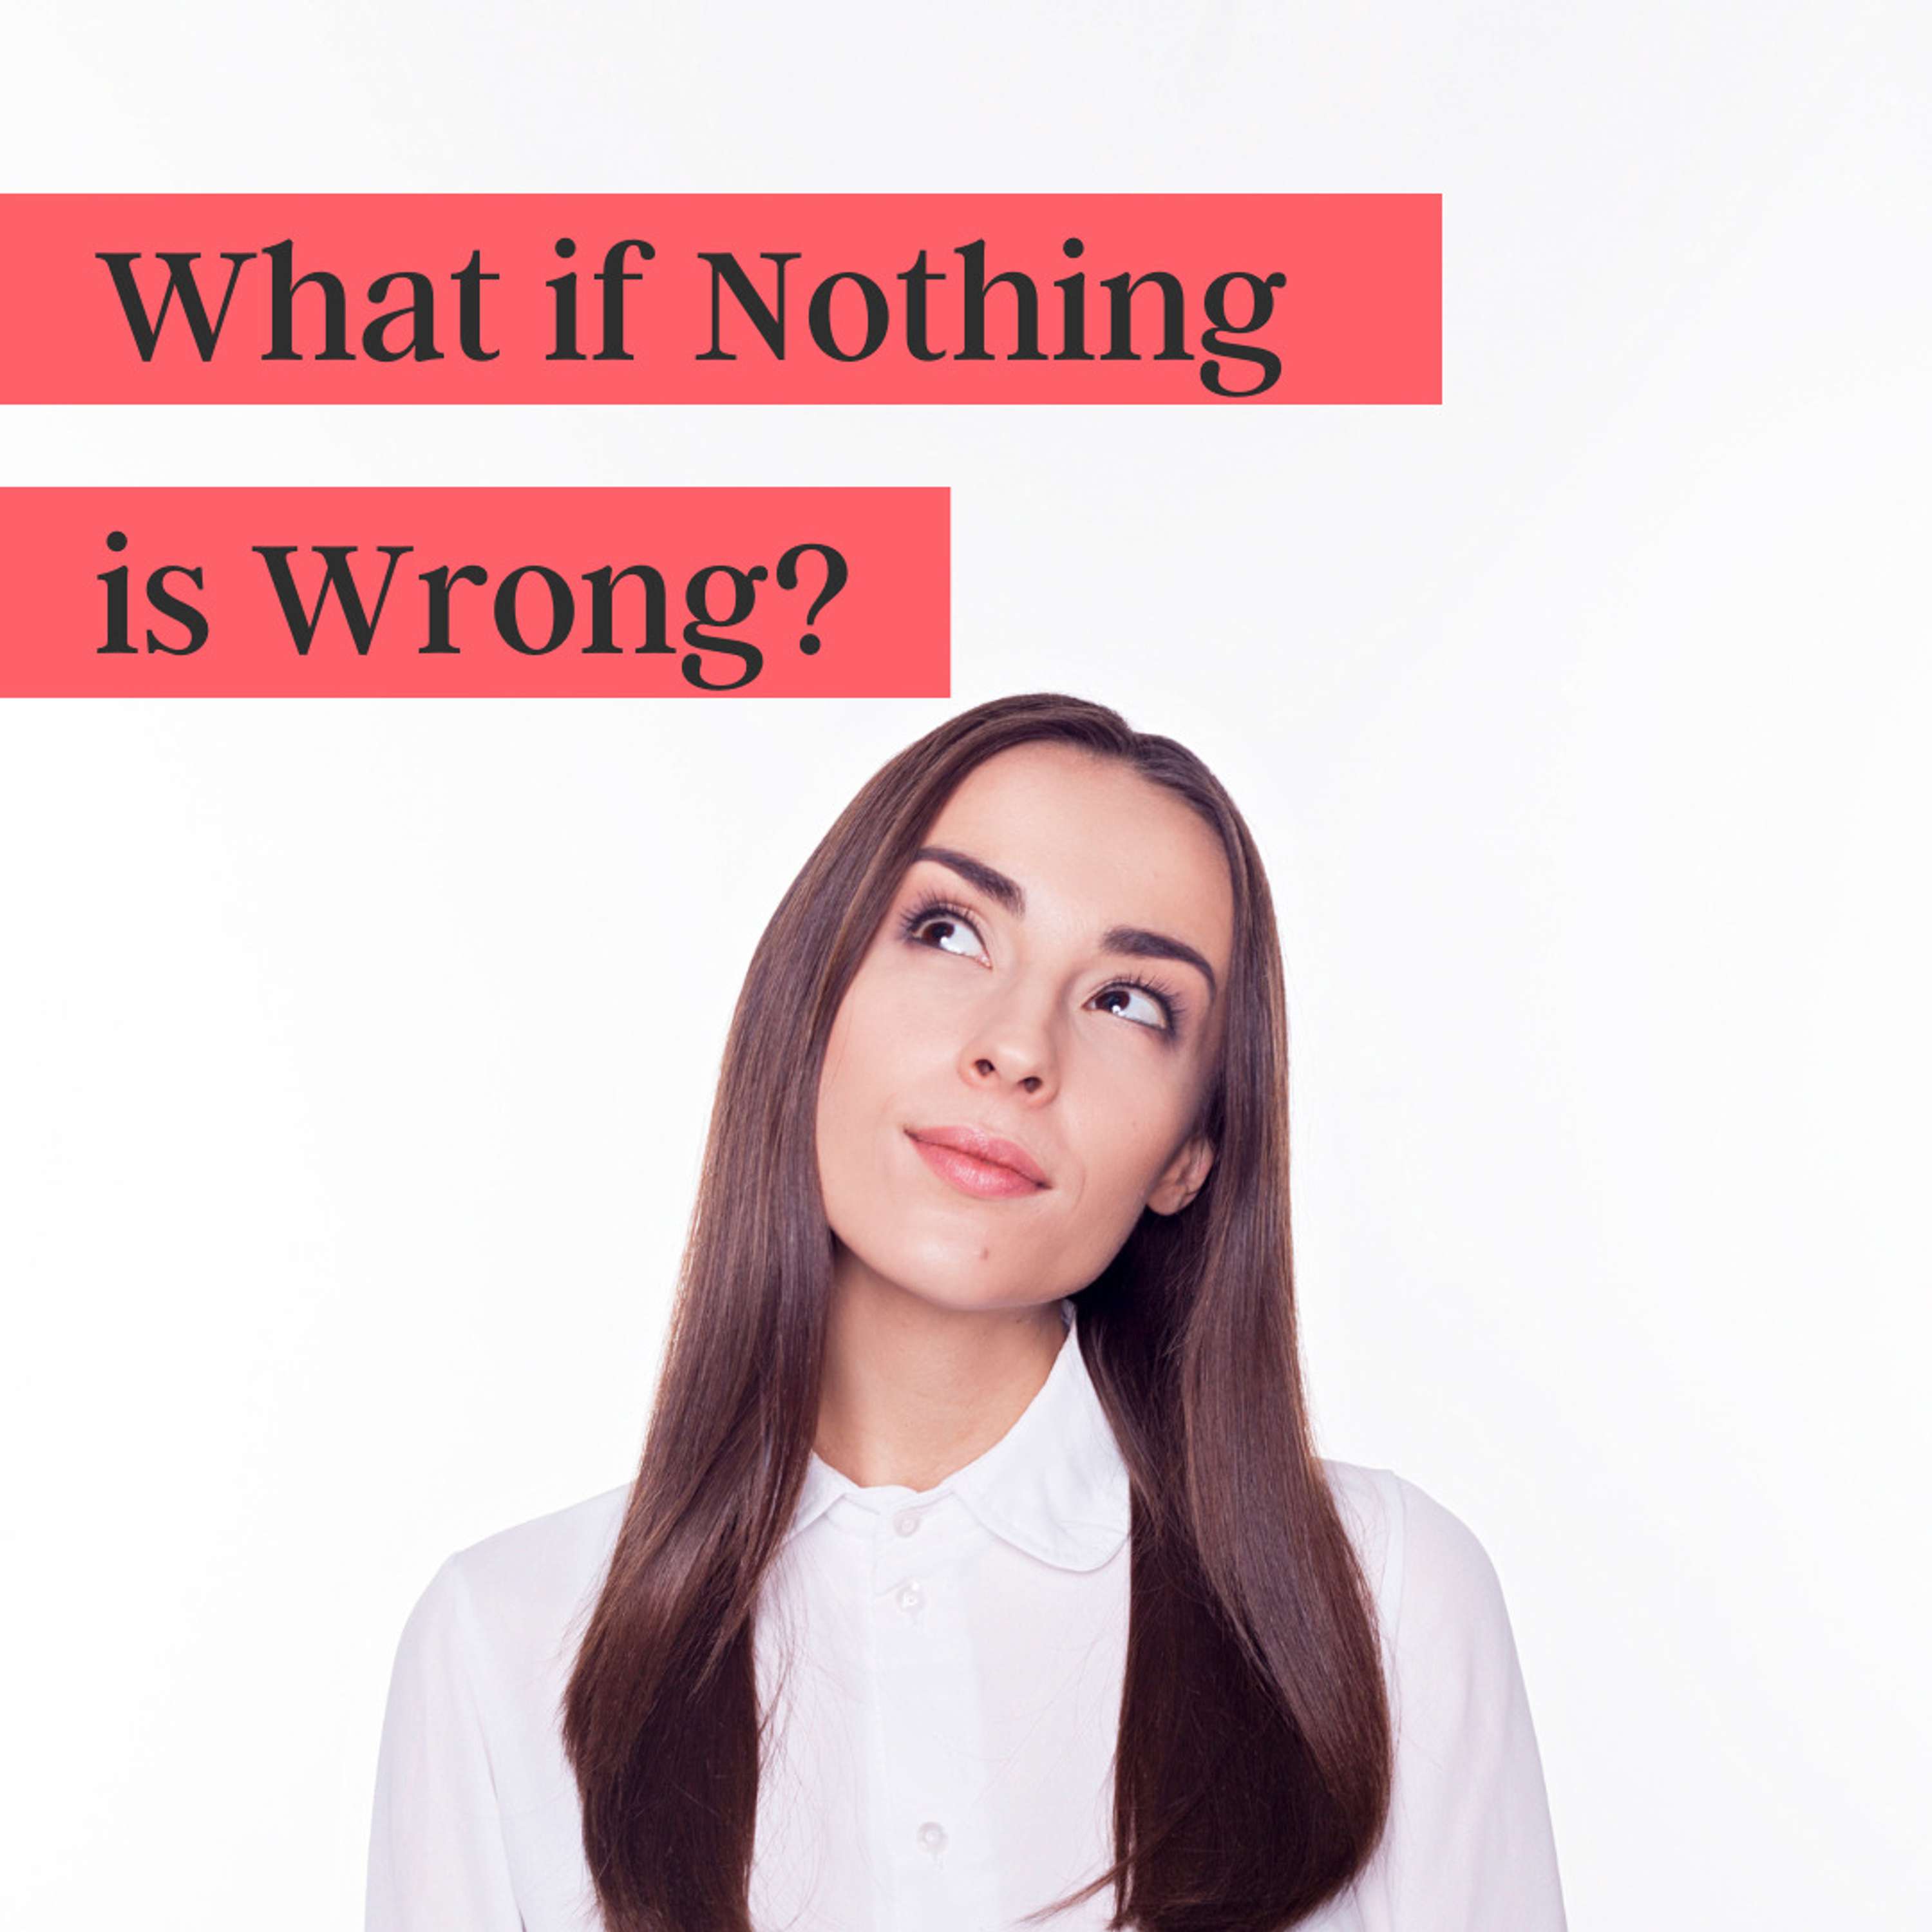 33. What if Nothing is Wrong?